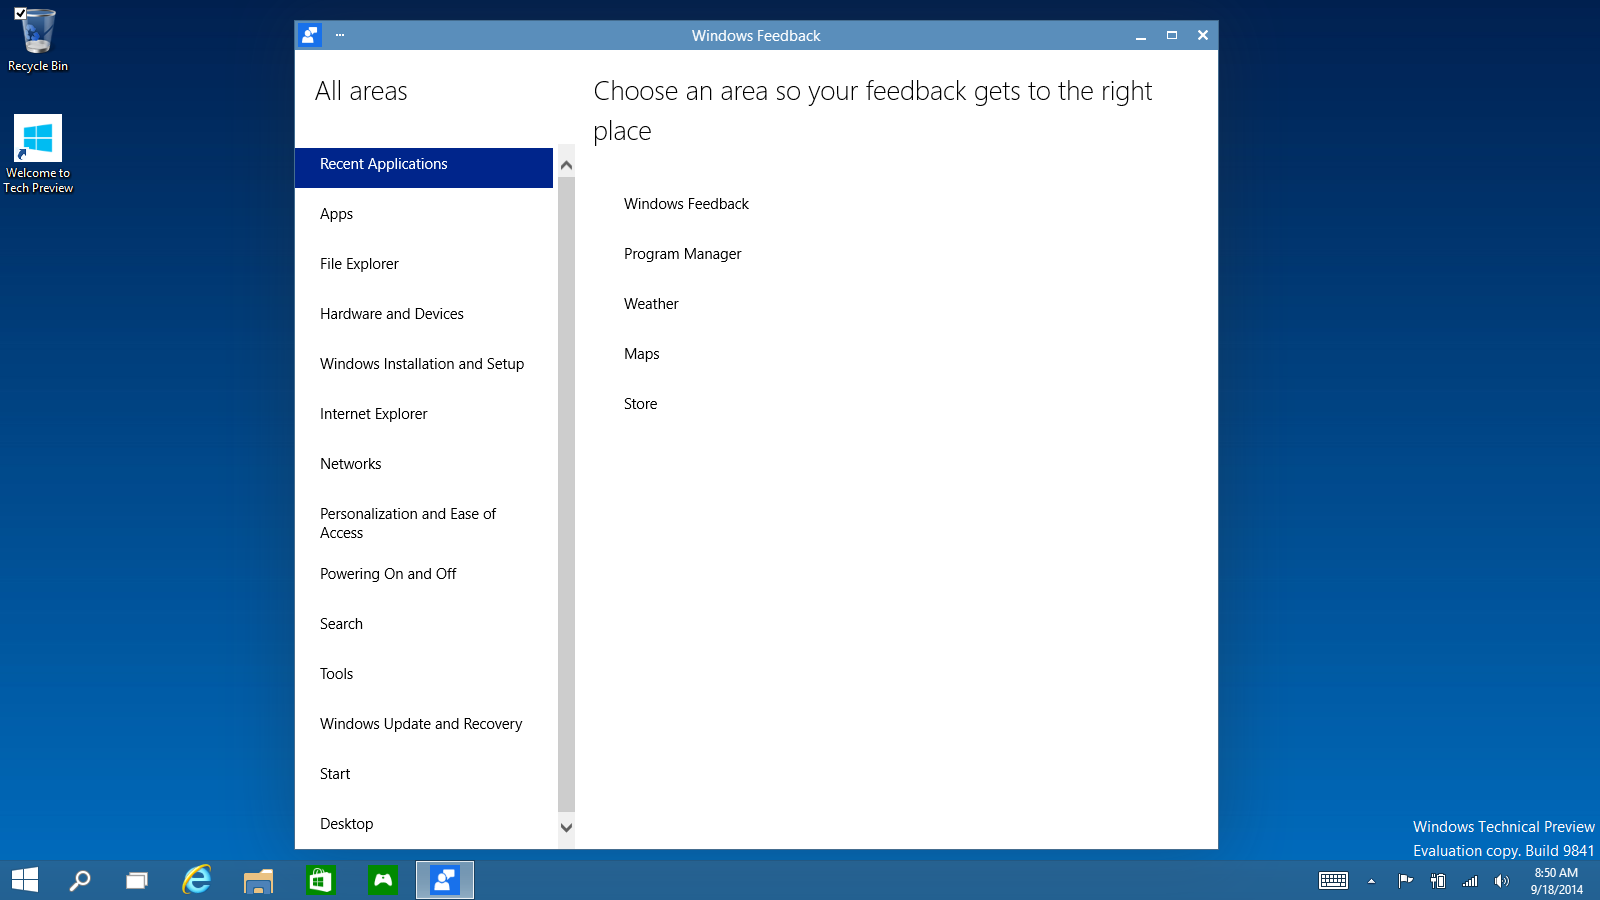 Join the Windows Insider Program and get the Windows 10 Technical